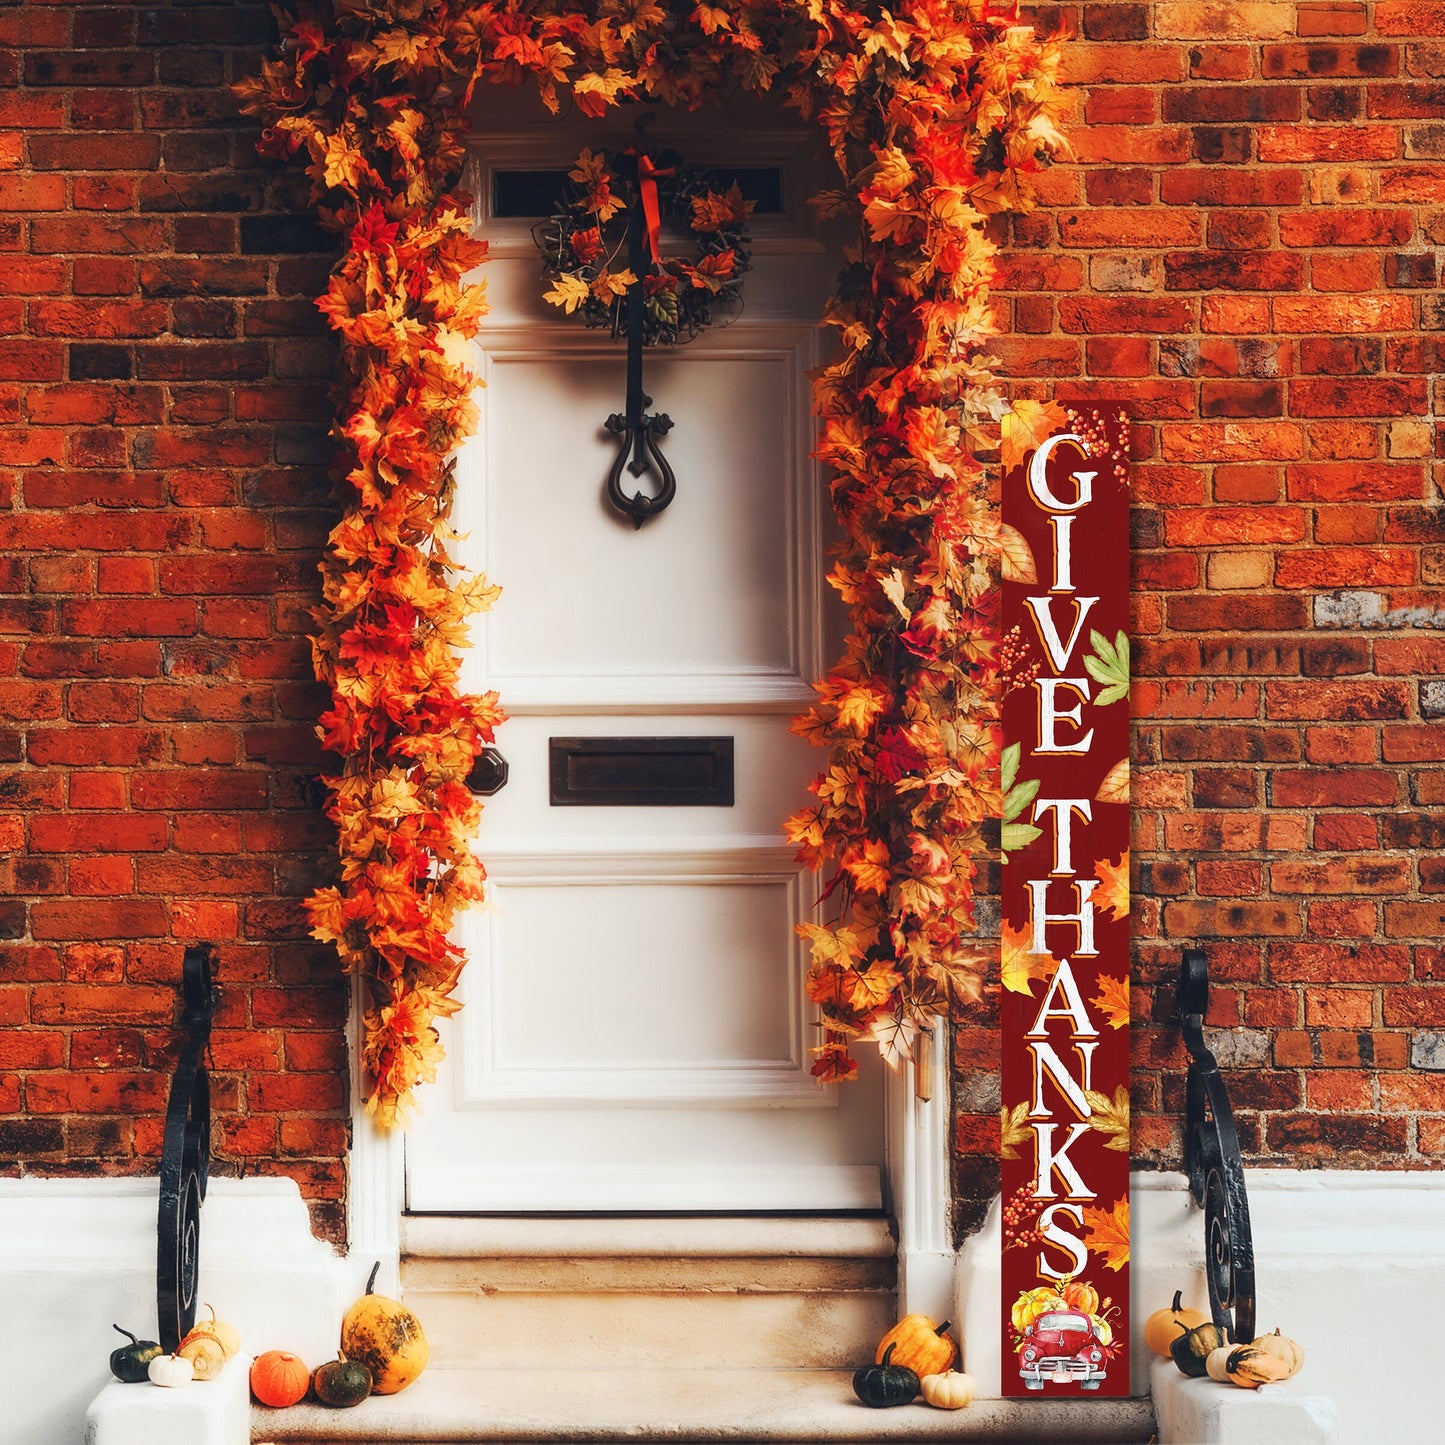 72in "Give Thanks" Fall Porch Sign | Front Door Autumn Decor | Thanksgiving Celebration | Ideal for Entryway, Living Room, Porch Decor